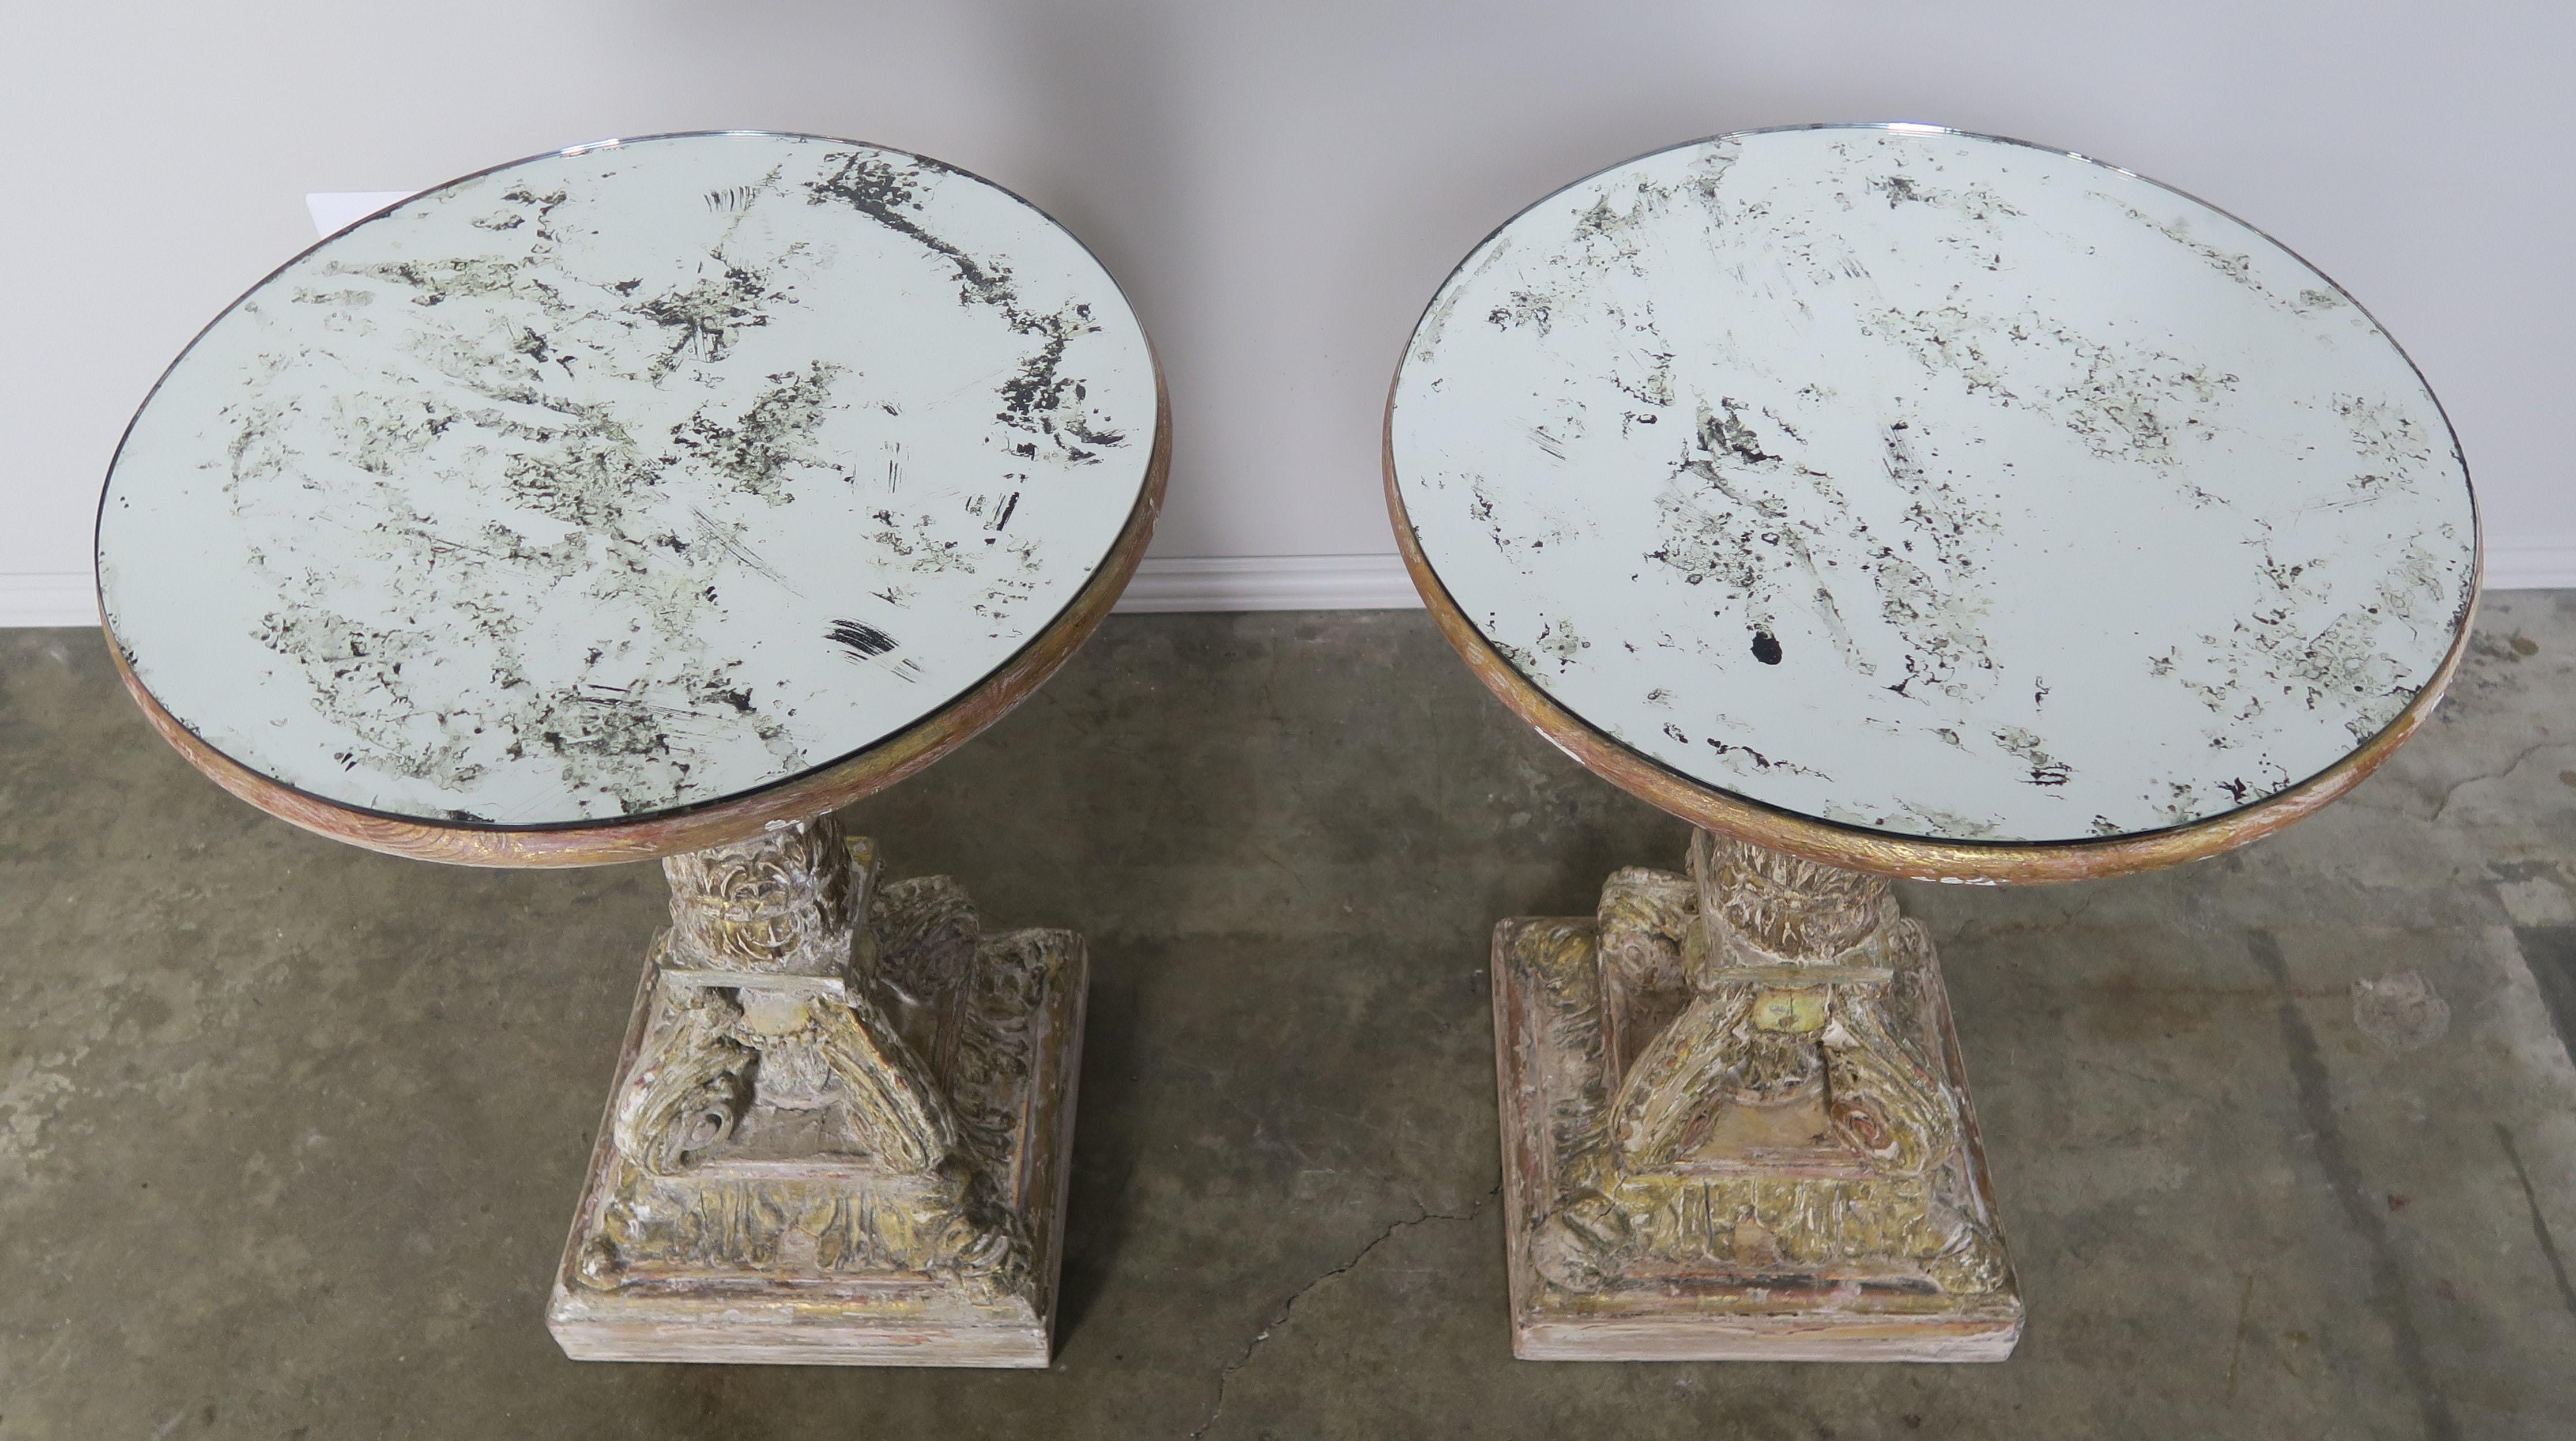 Bleached Pair of Carved Wood Italian Tables with Mirrored Tops